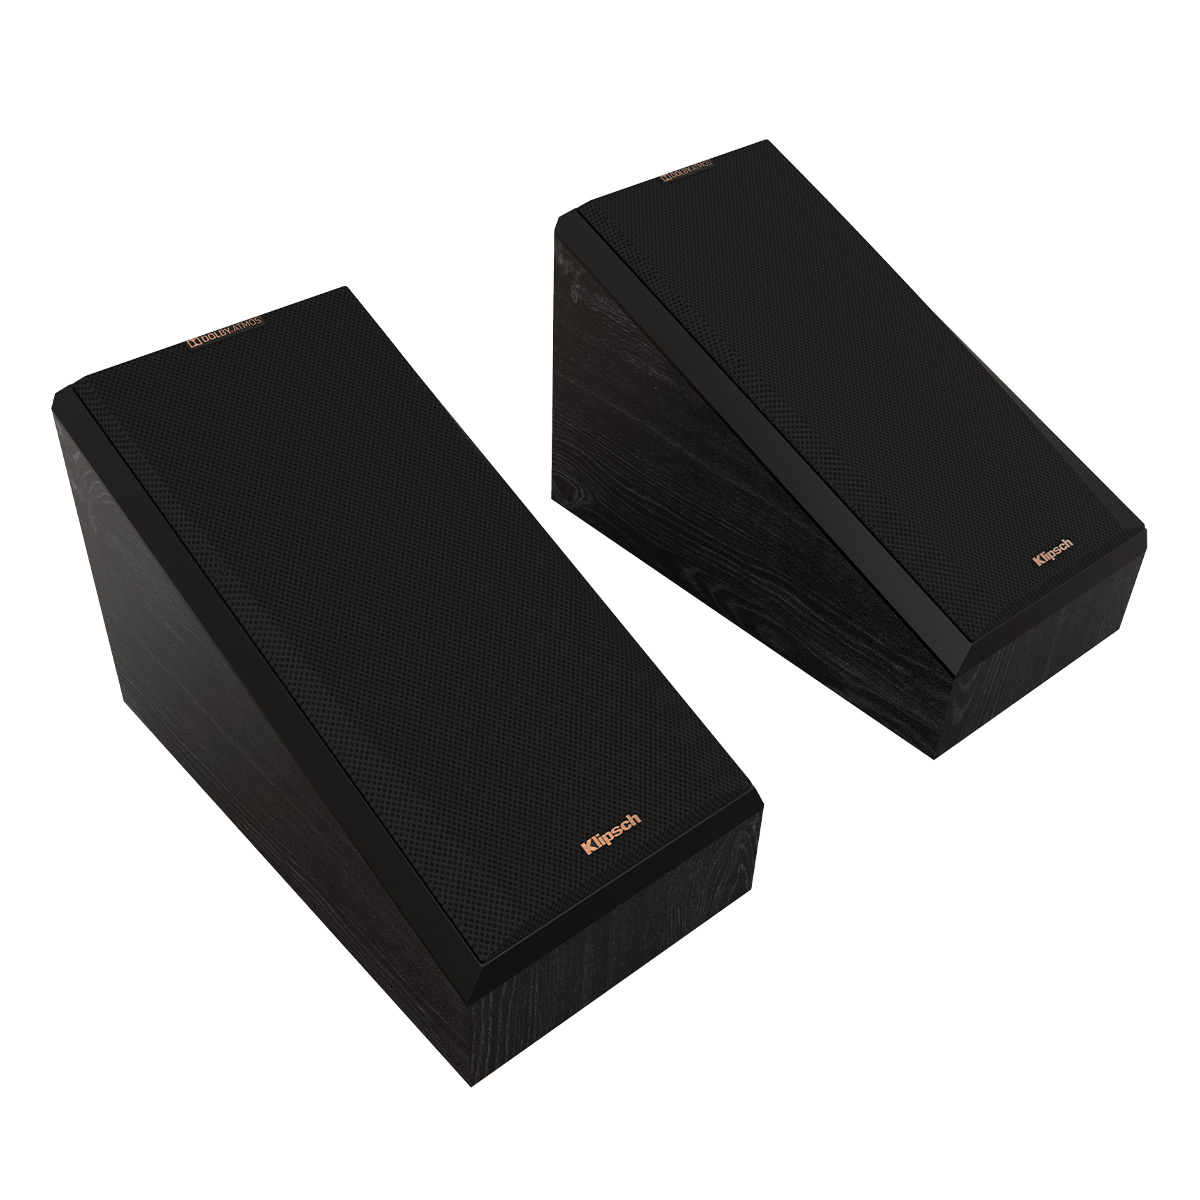 Klipsch RP-500SA II Reference Premiere Dolby Atmos Speaker - Pair (Ebony) - image 2 of 10